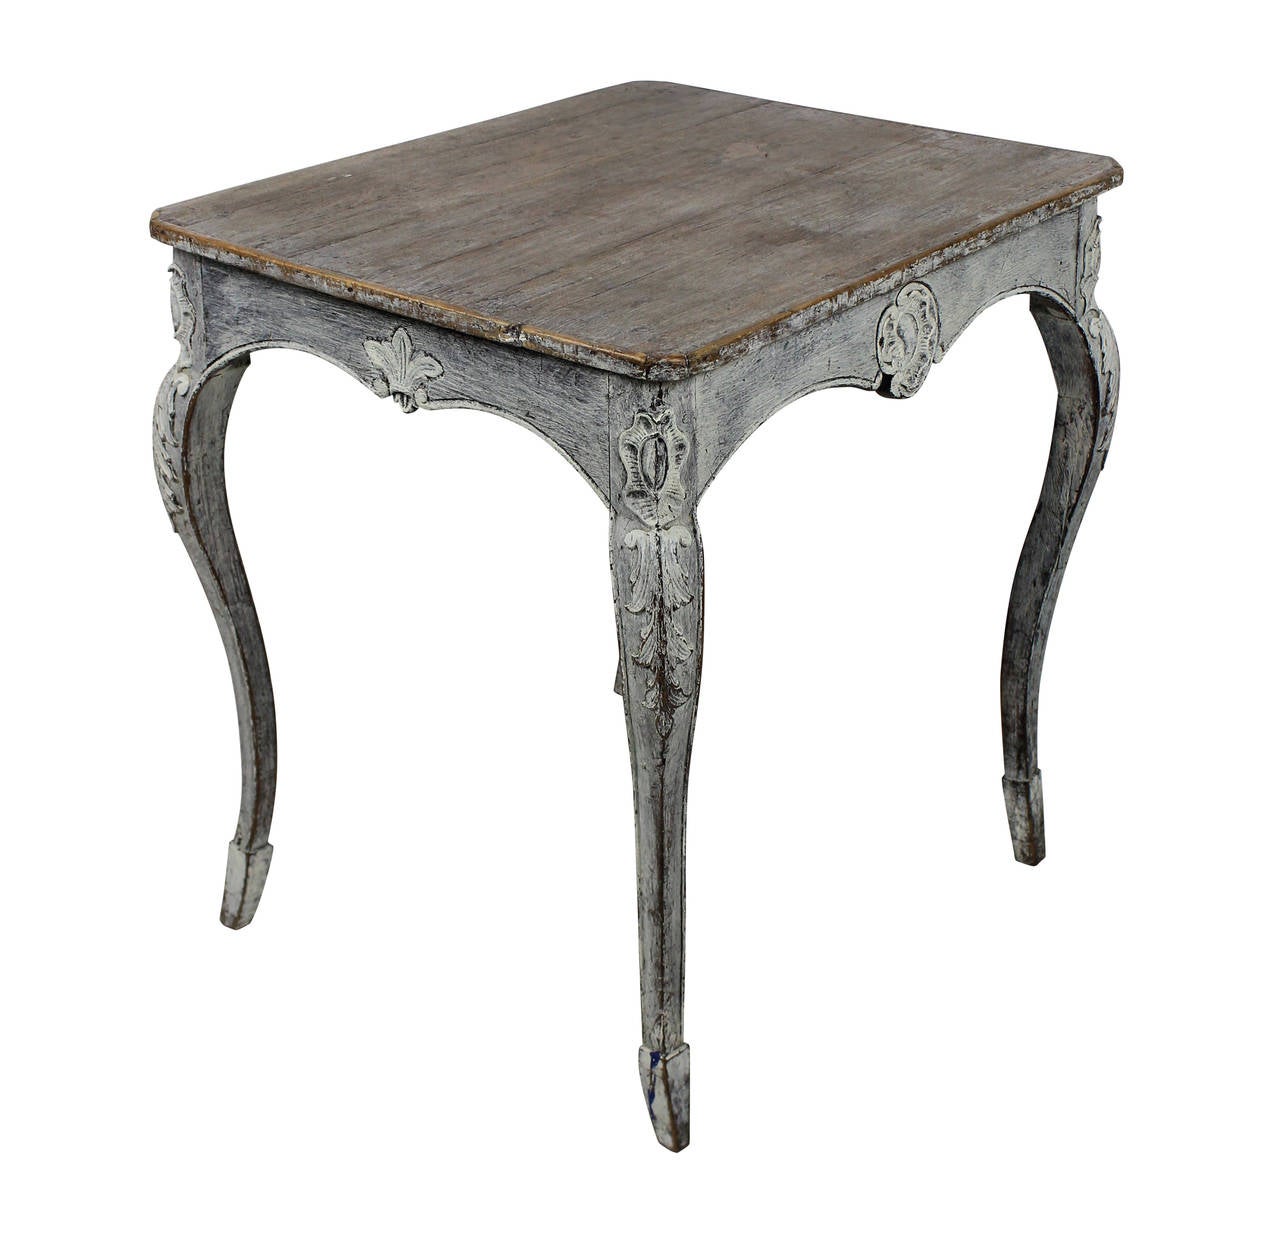 A Swedish grey painted side table with cabriole legs. Original paints.